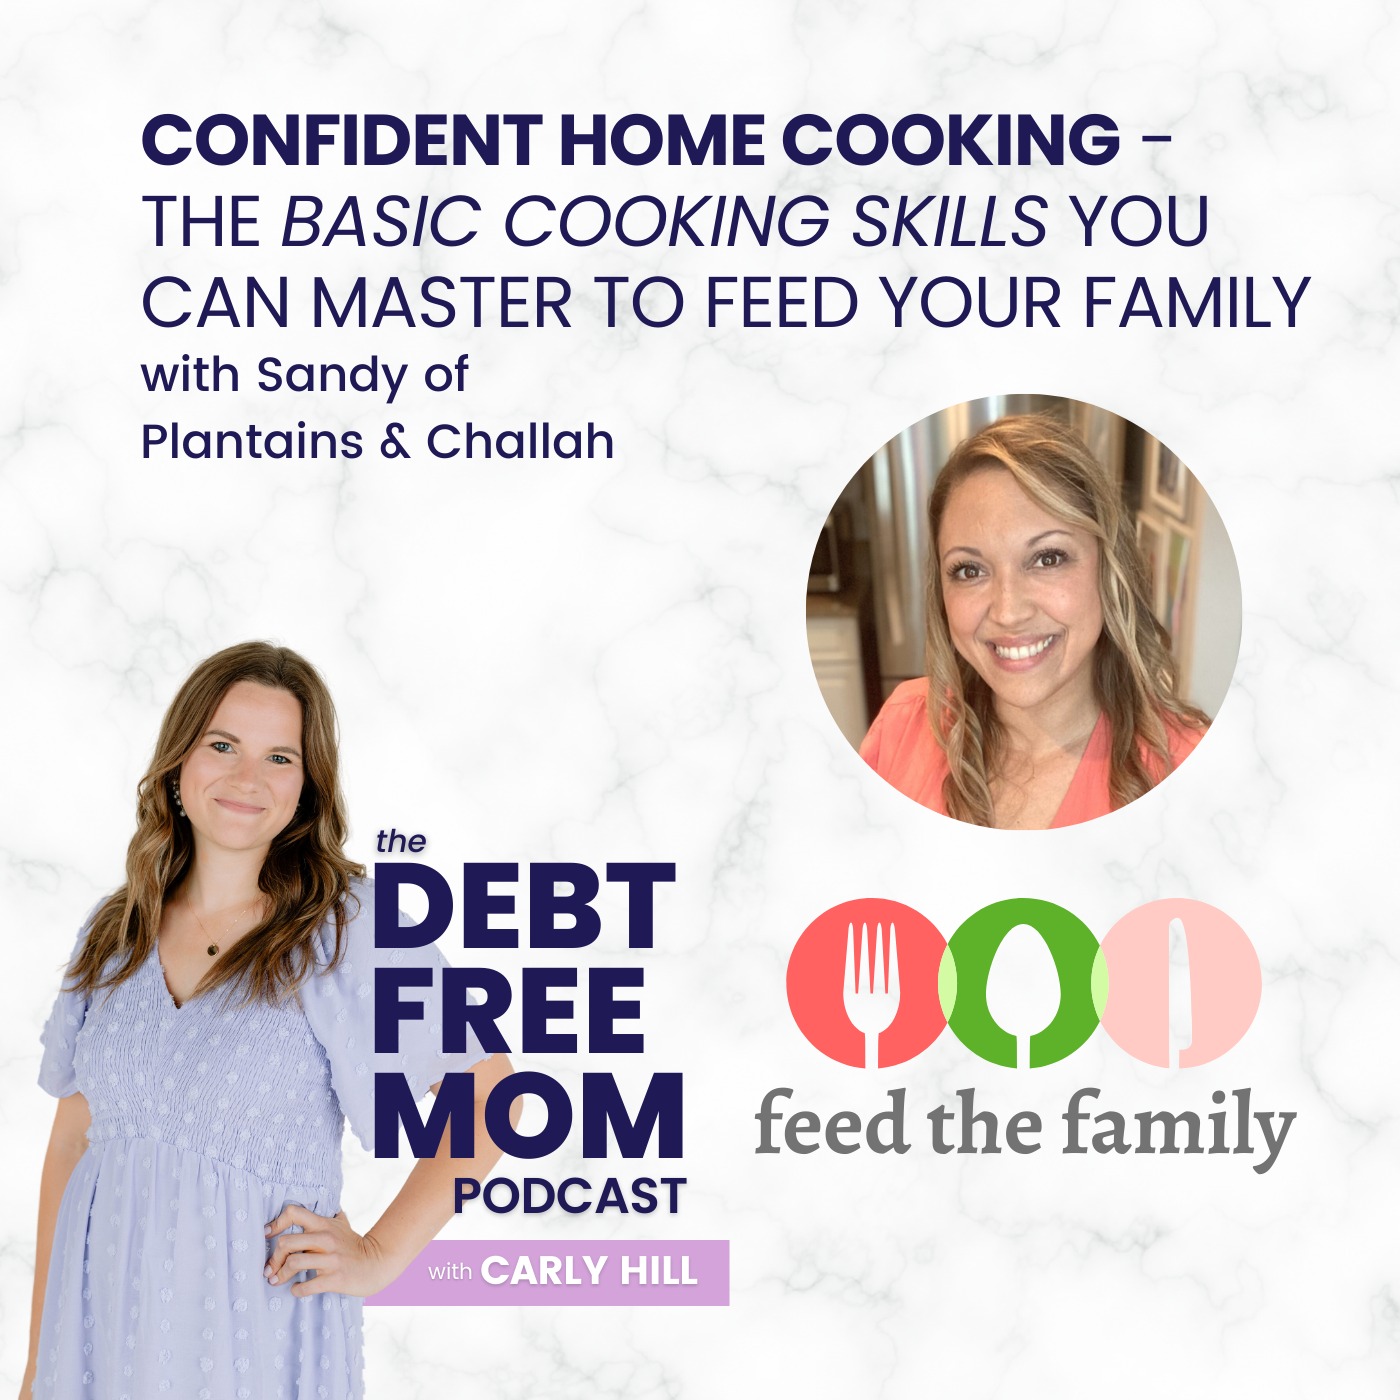 52. Confident Home Cooking - The Basic Cooking Skills You Can Master to Feed Your Family